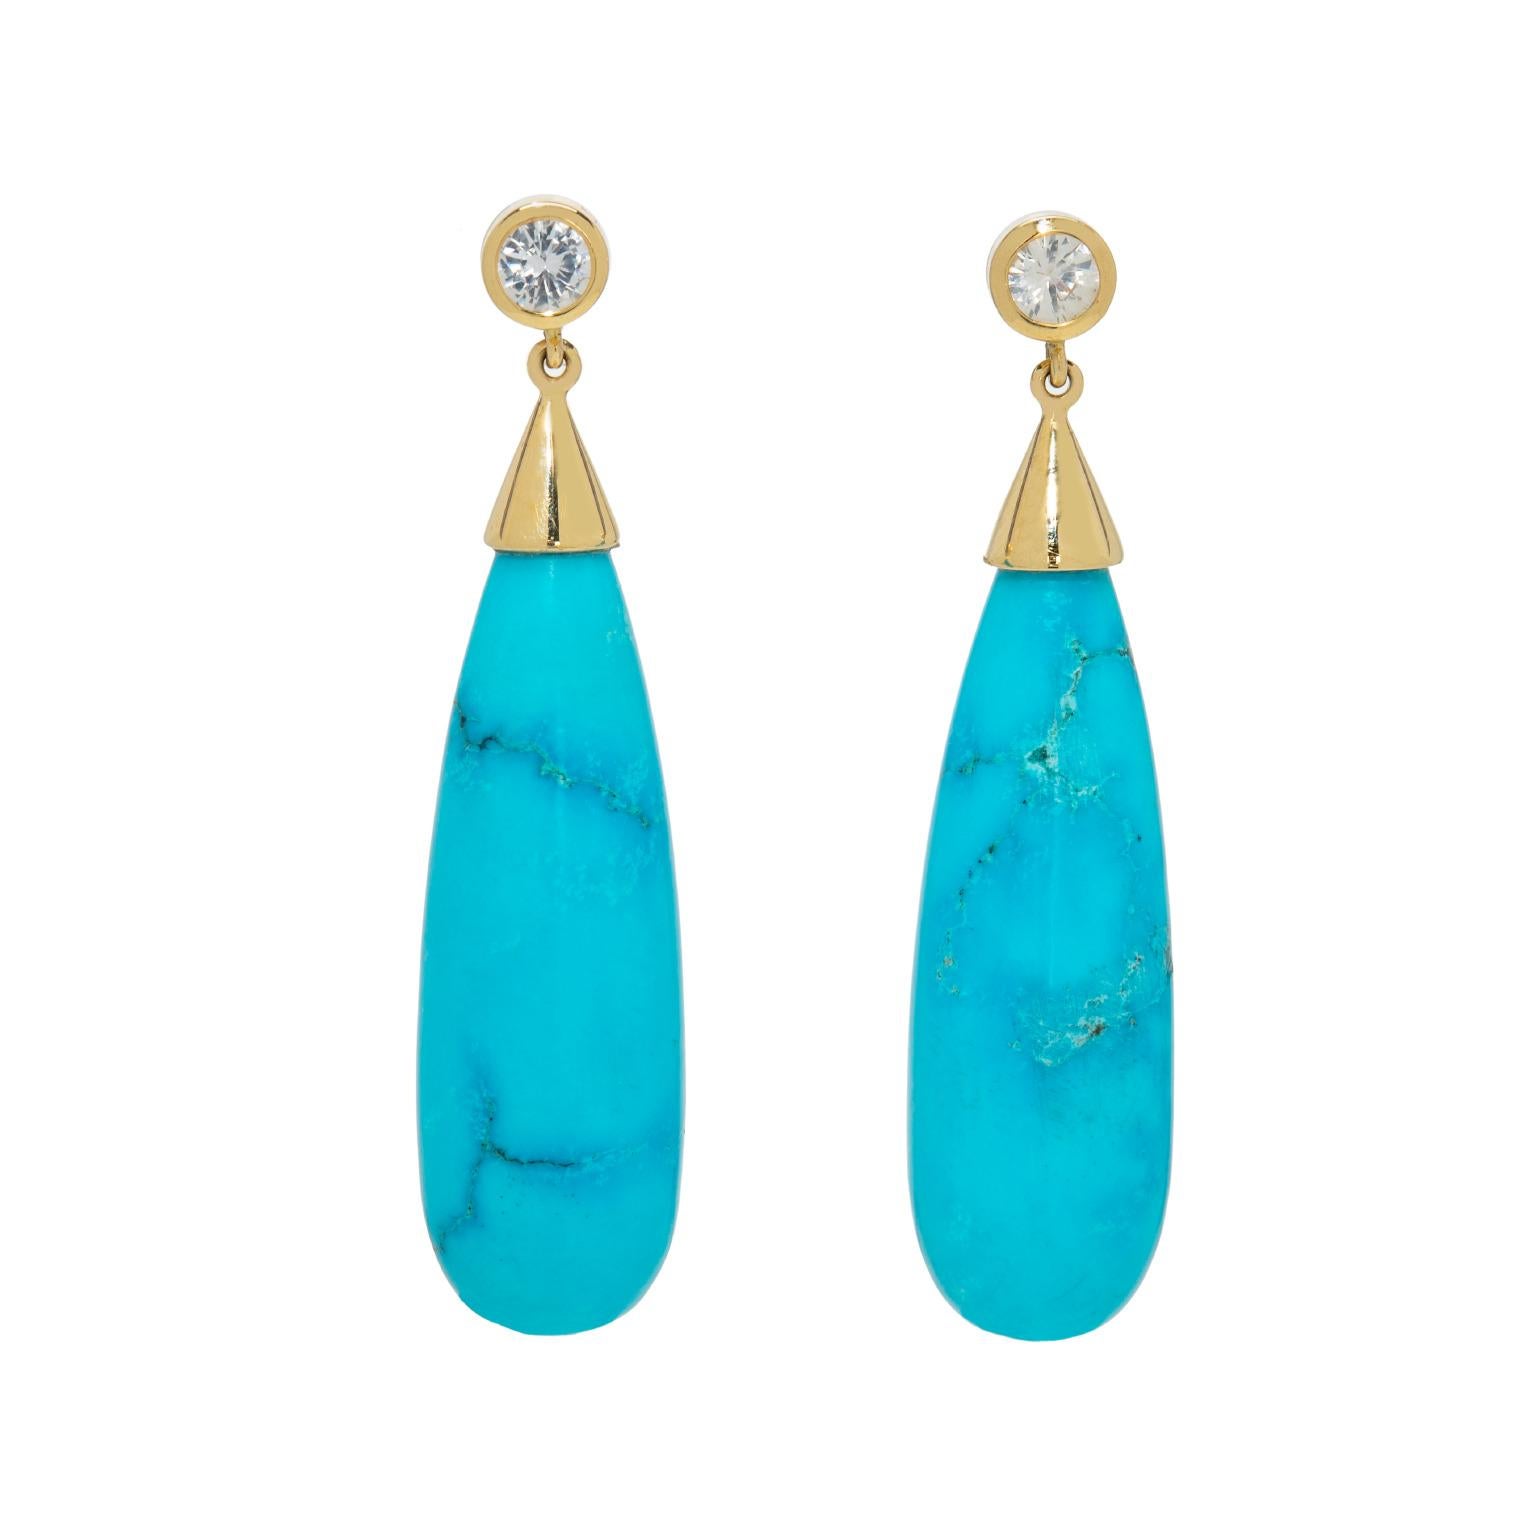 Contemporary 18 Karat Gold Earrings with Turquoise Drops and White Sapphires, by Gloria Bass For Sale